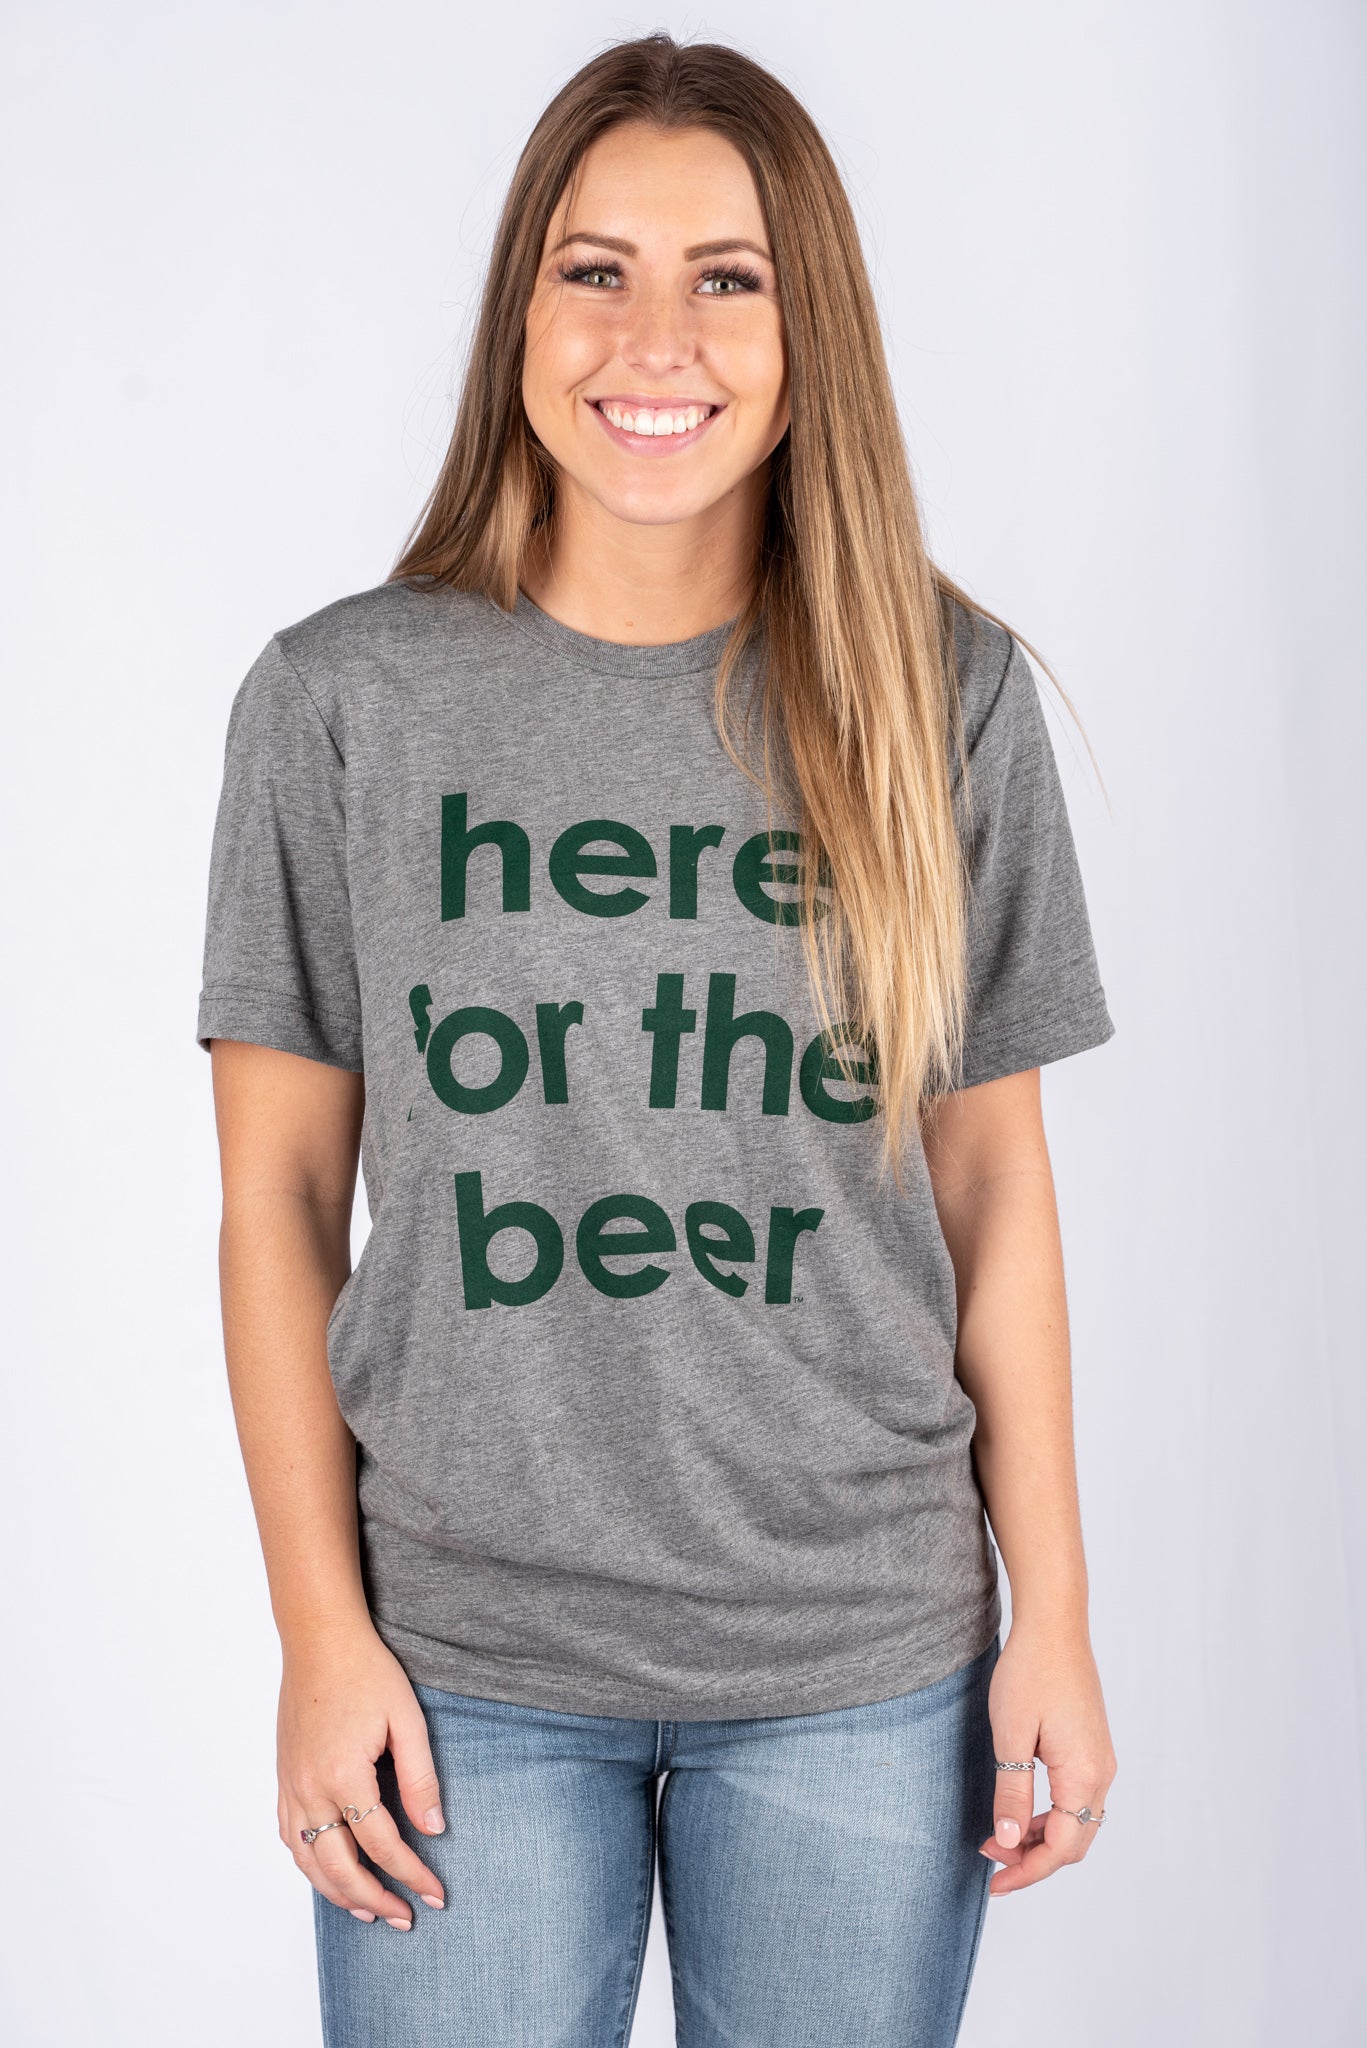 Here For The Beer Unisex Short Sleeve T-shirt Grey - Trendy T-shirts - Cute Graphic Tee Fashion at Lush Fashion Lounge Boutique in Oklahoma